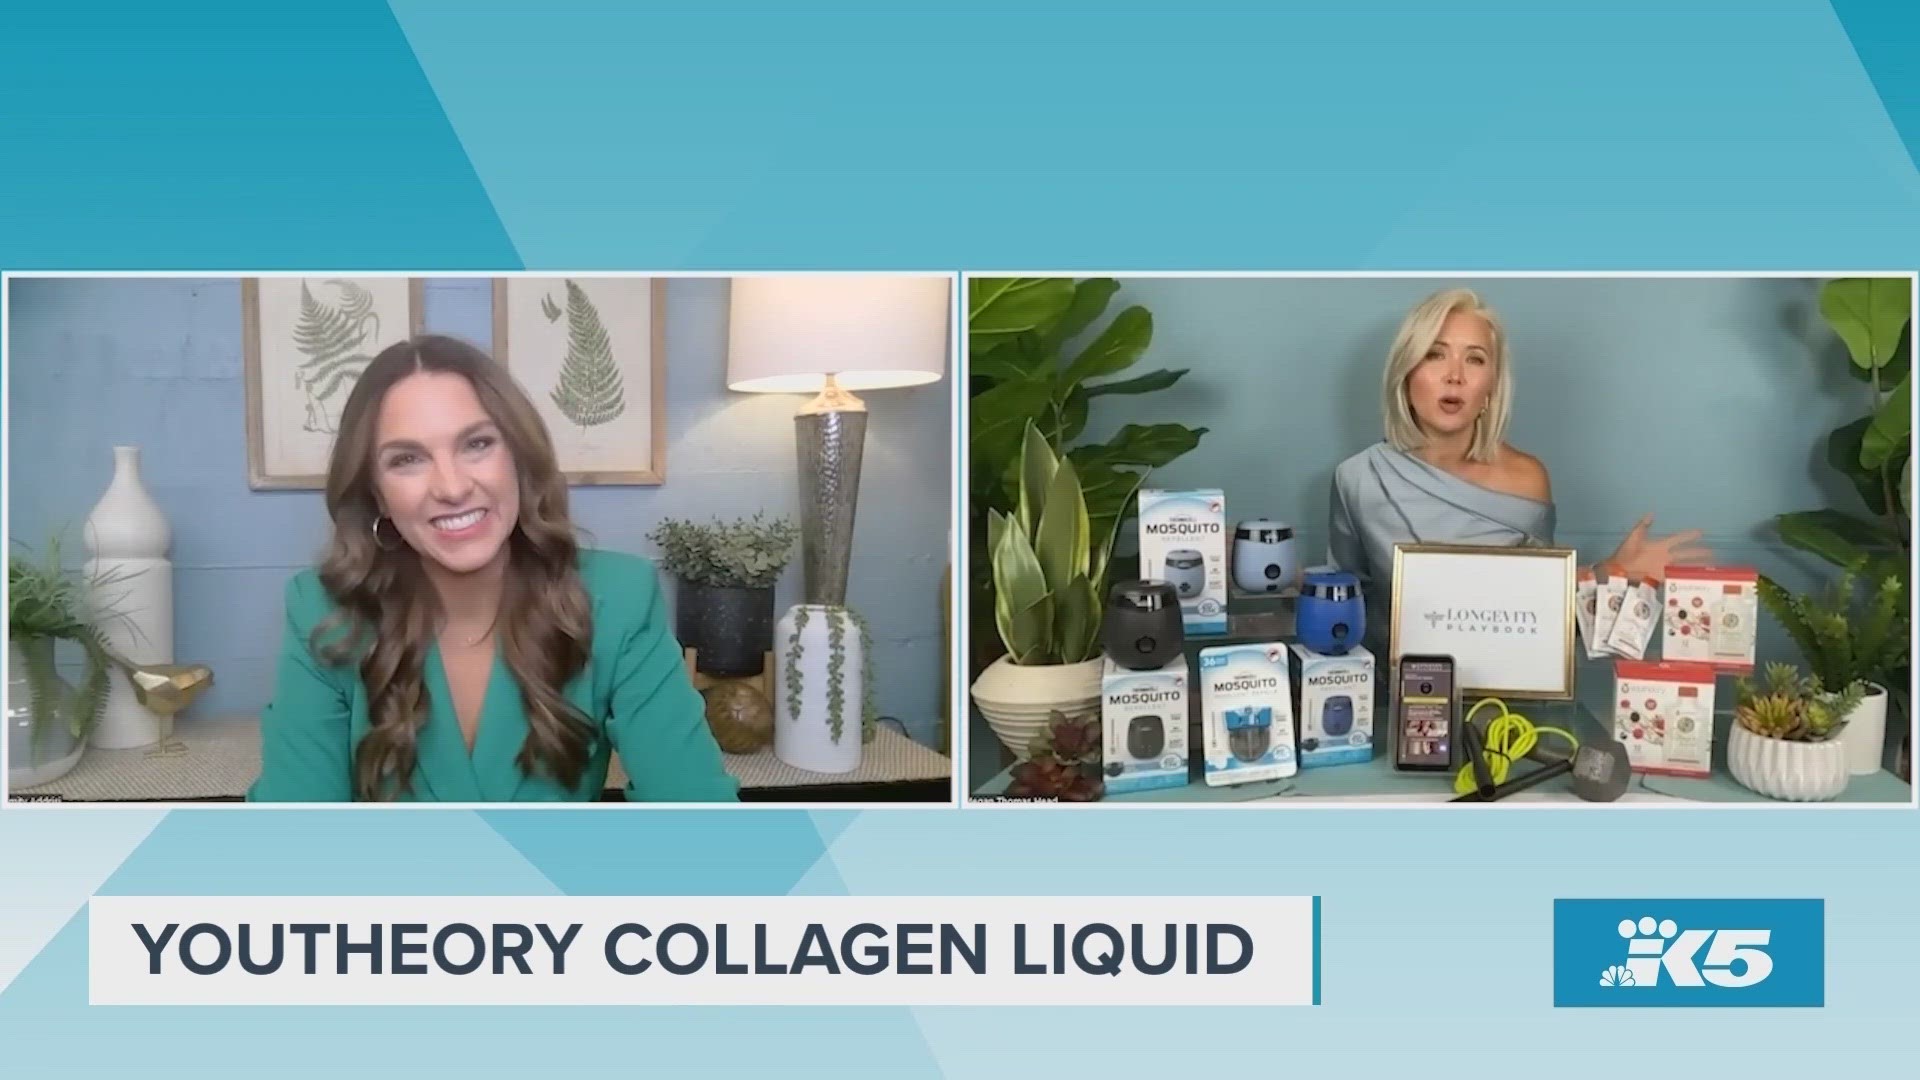 Lifestyle Expert Megan Thomas Head is here to share a few summer beauty and wellness ideas for feeling our best. Sponsored by Bourbon Blonde Blog.